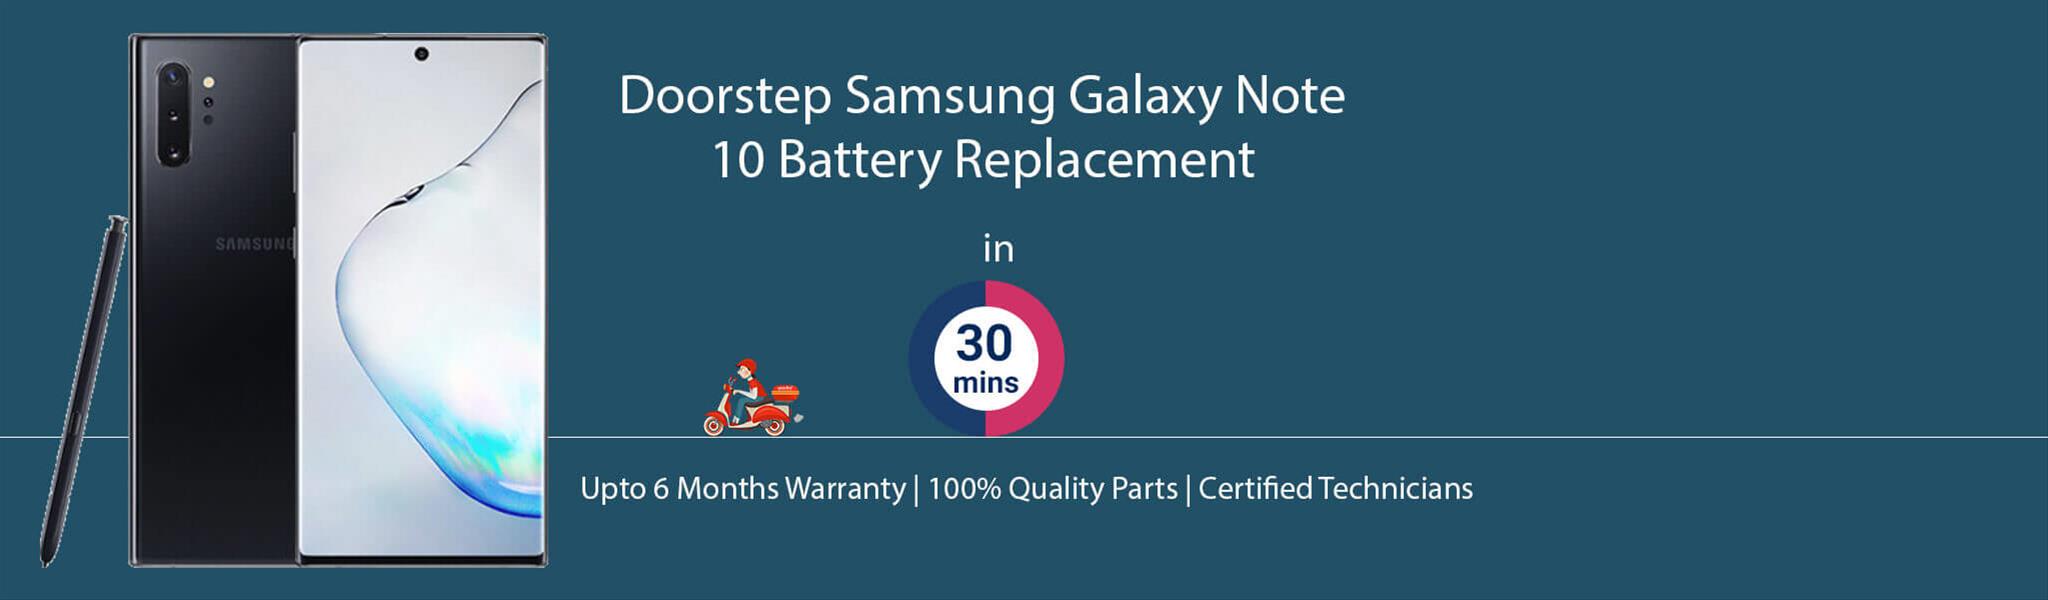 samsung-galaxy-note-10-battery-replacement.jpg